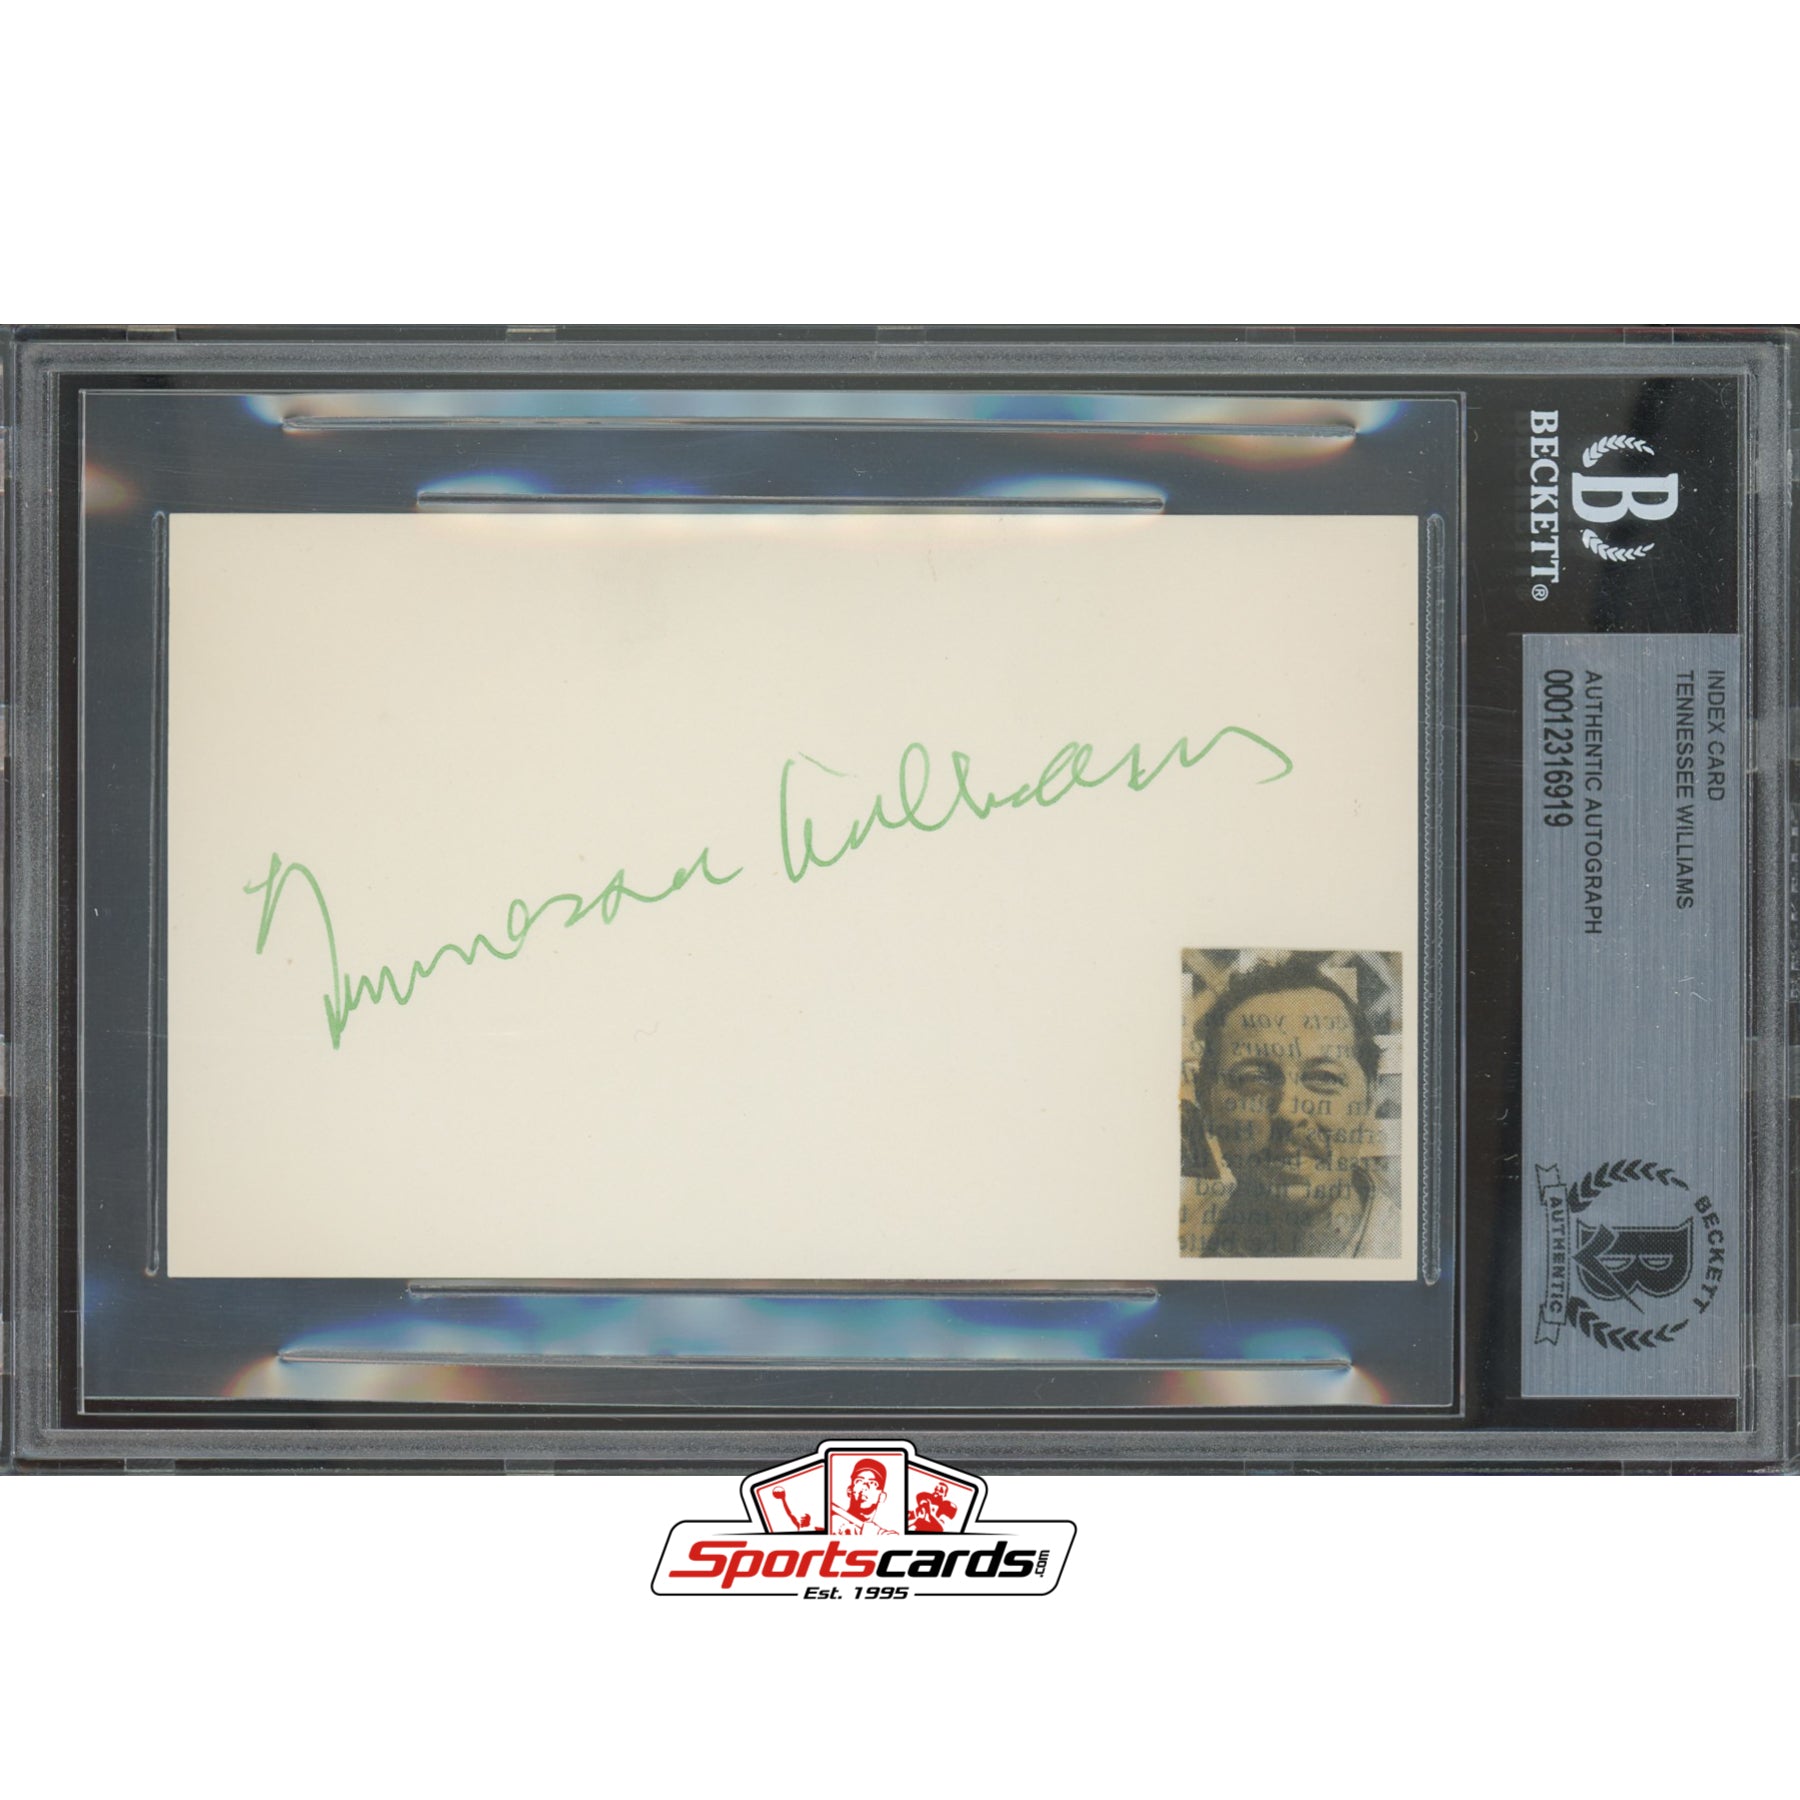 Tennessee Williams Signed Auto 3x5 Index Card BAS Beckett Encapsulated